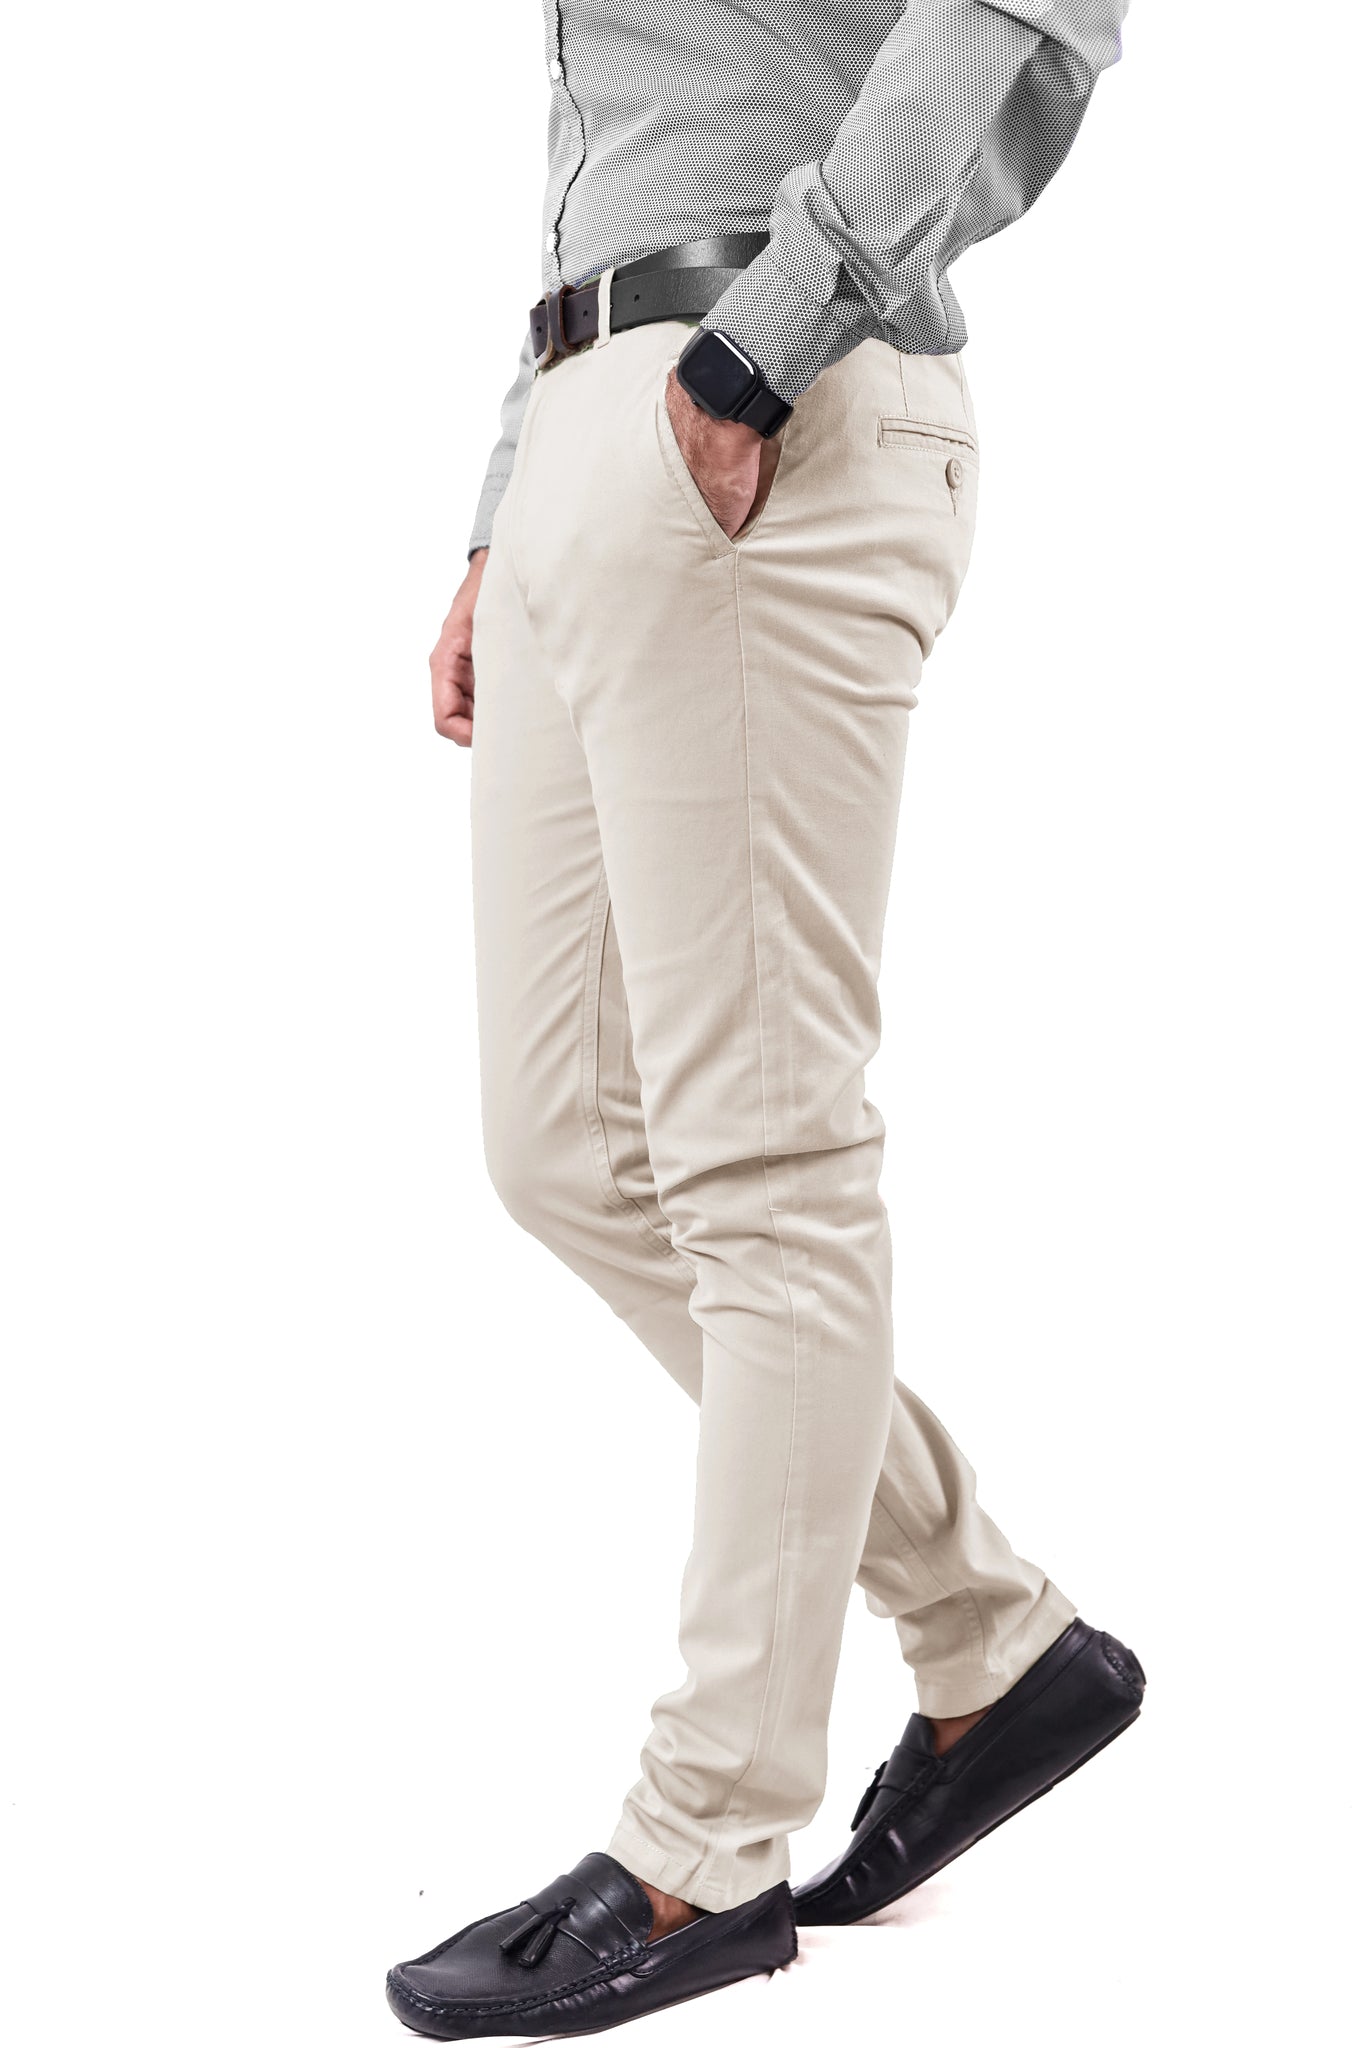 Creamy Camelwood cotton pant